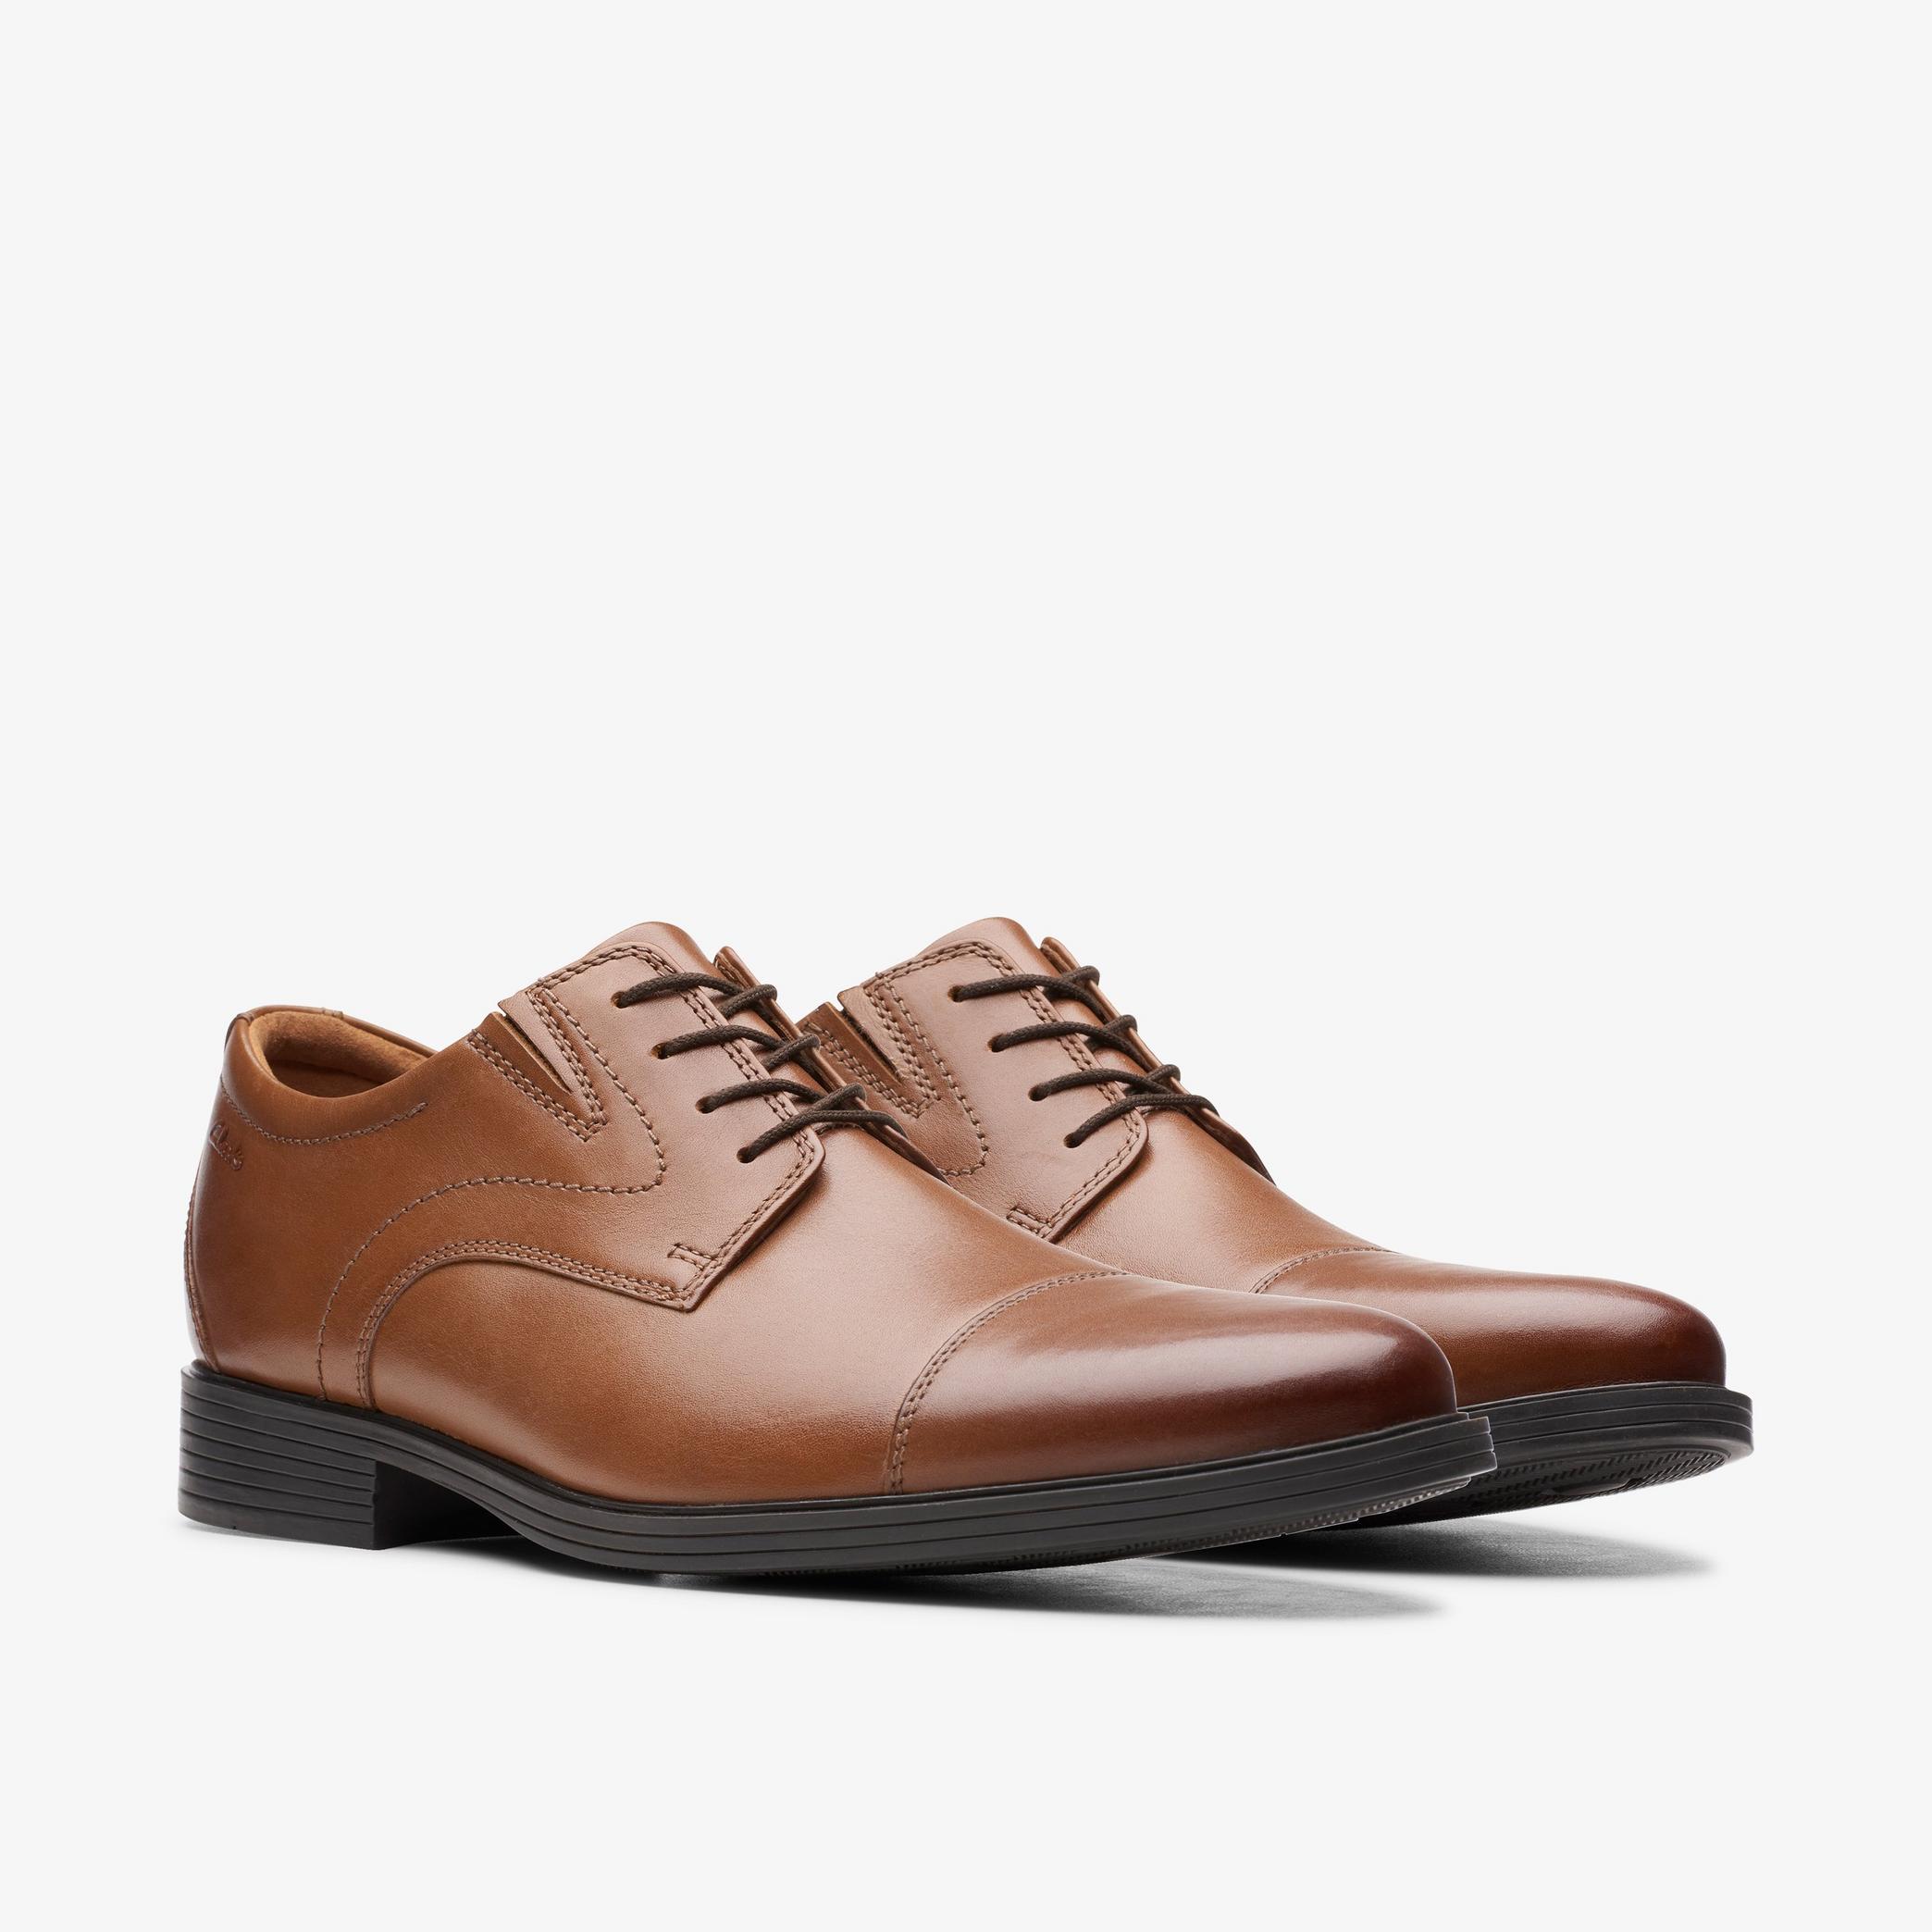 Whiddon Cap Dark Tan Leather Oxford Shoes, view 4 of 6